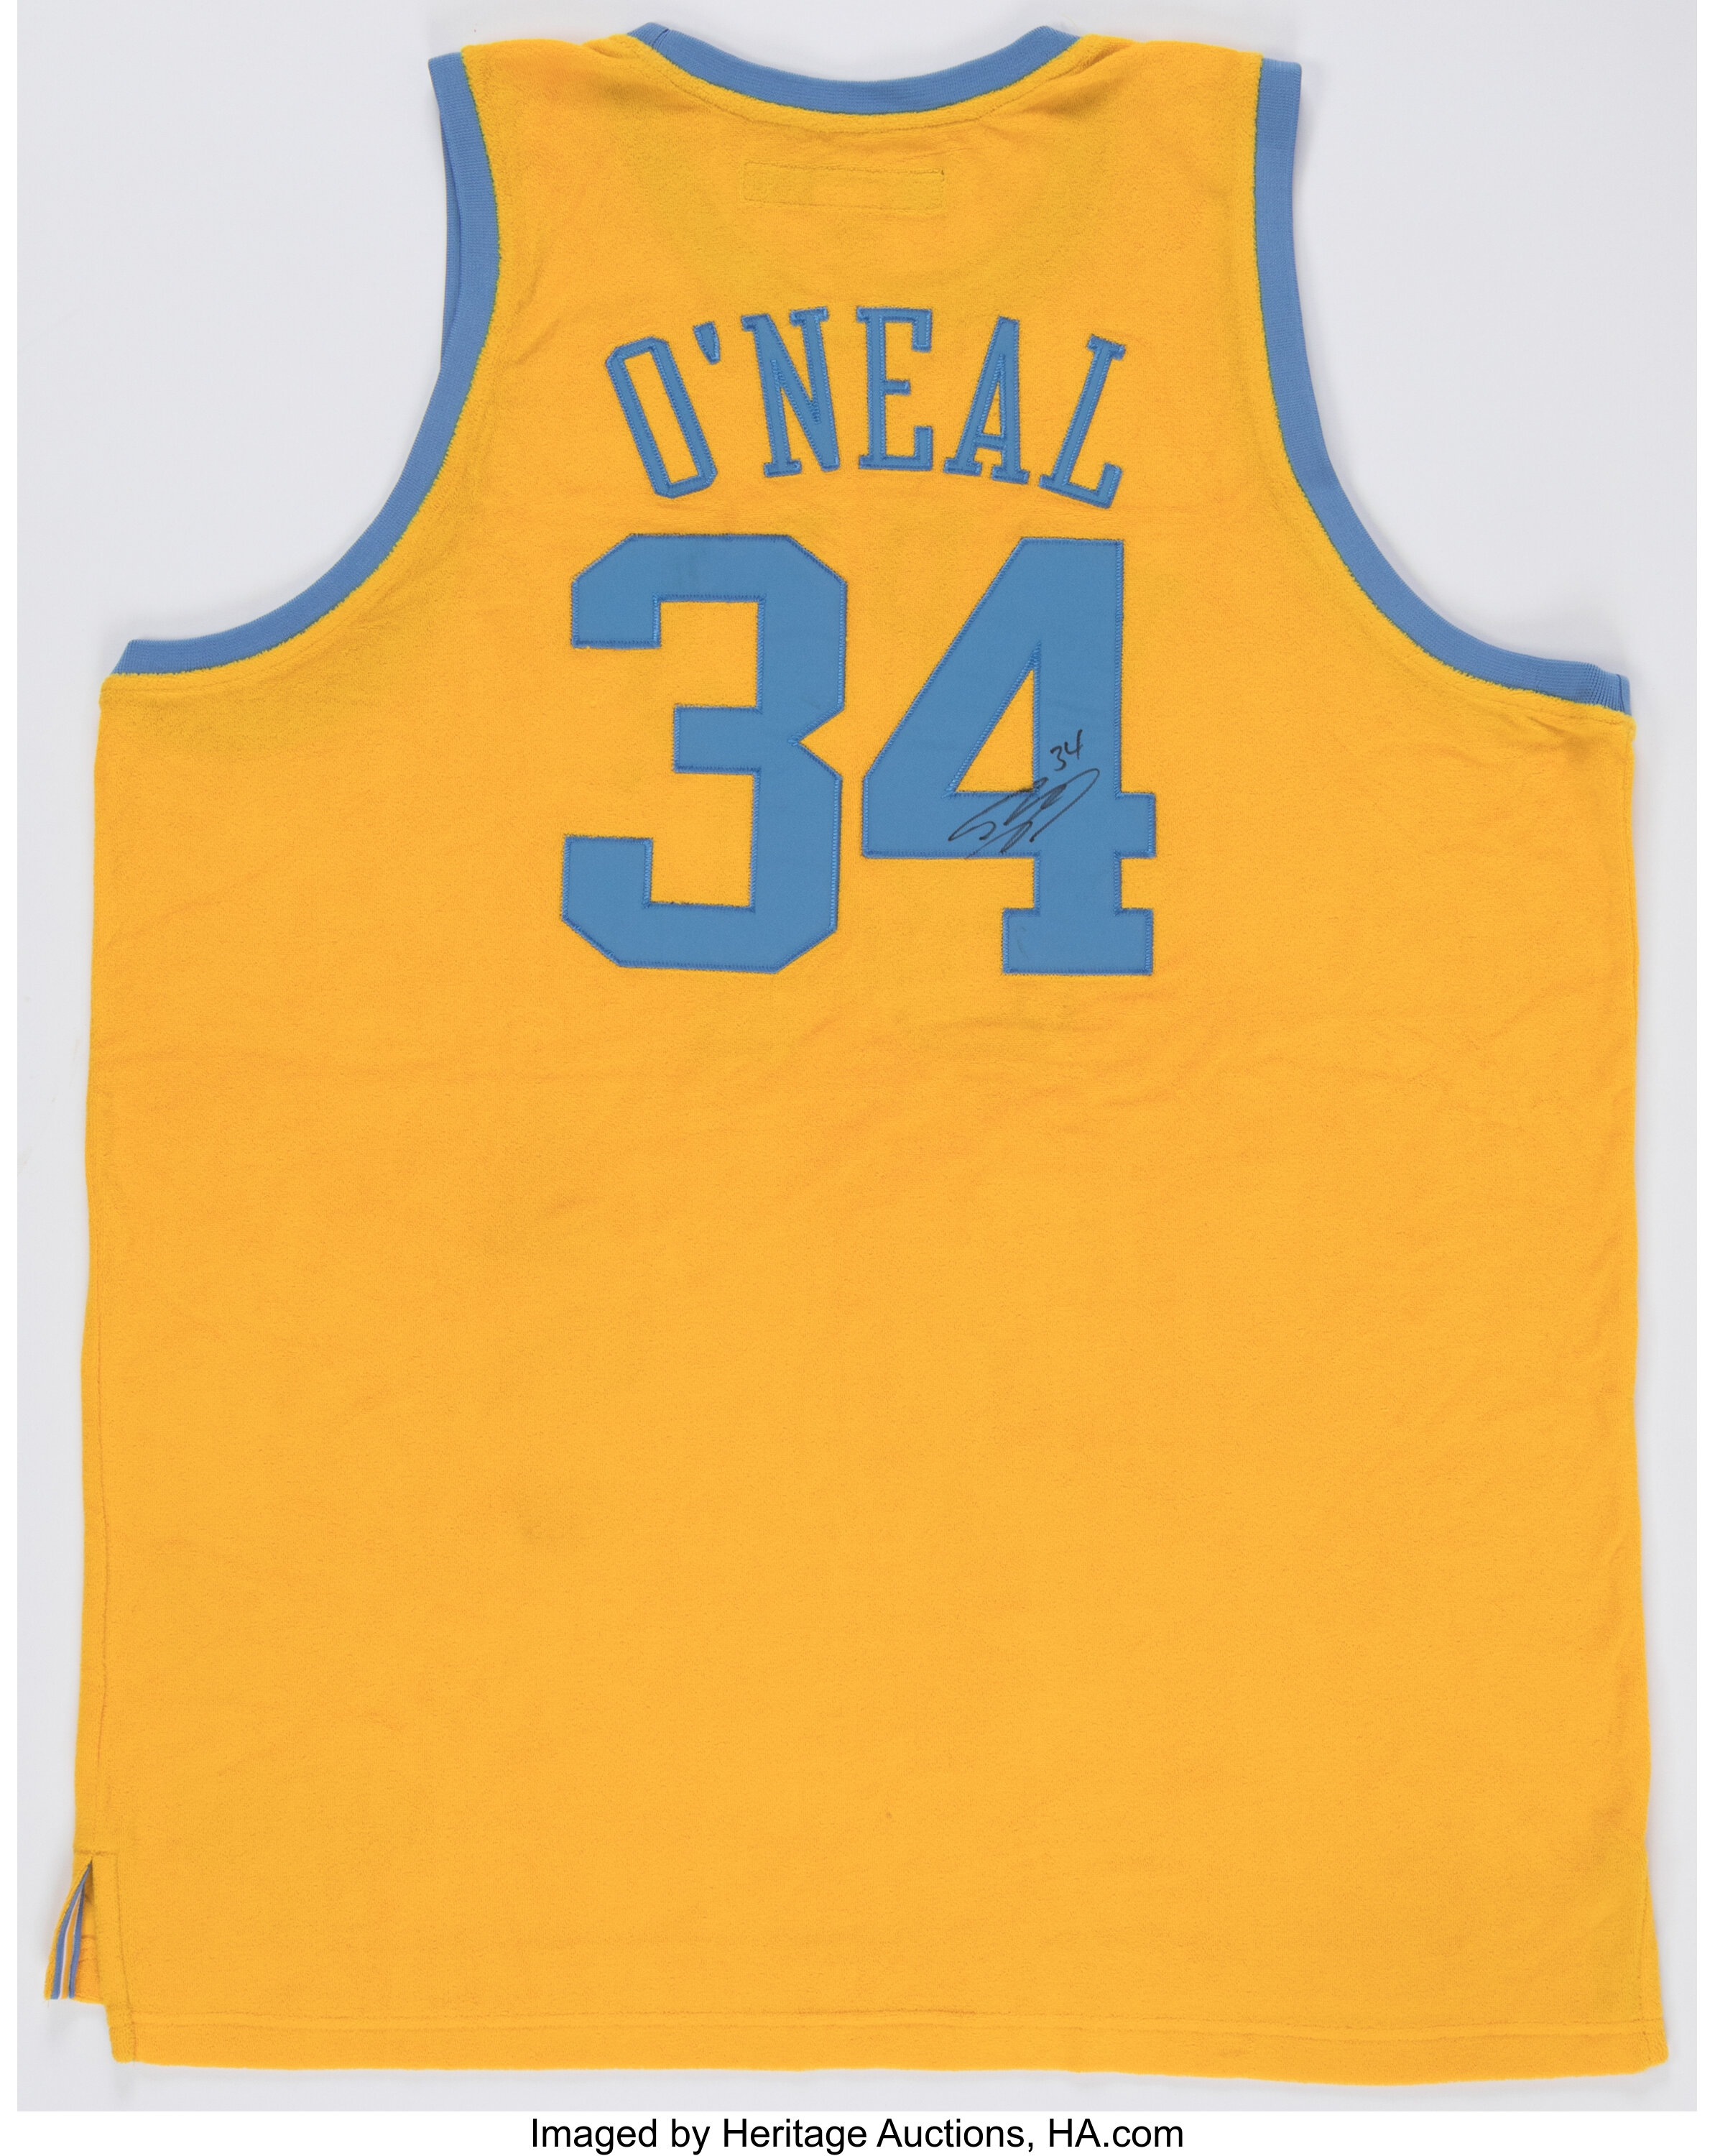 Shaquille O'Neal Signed Minneapolis Lakers Jersey - The Johnny Mack, Lot  #44276